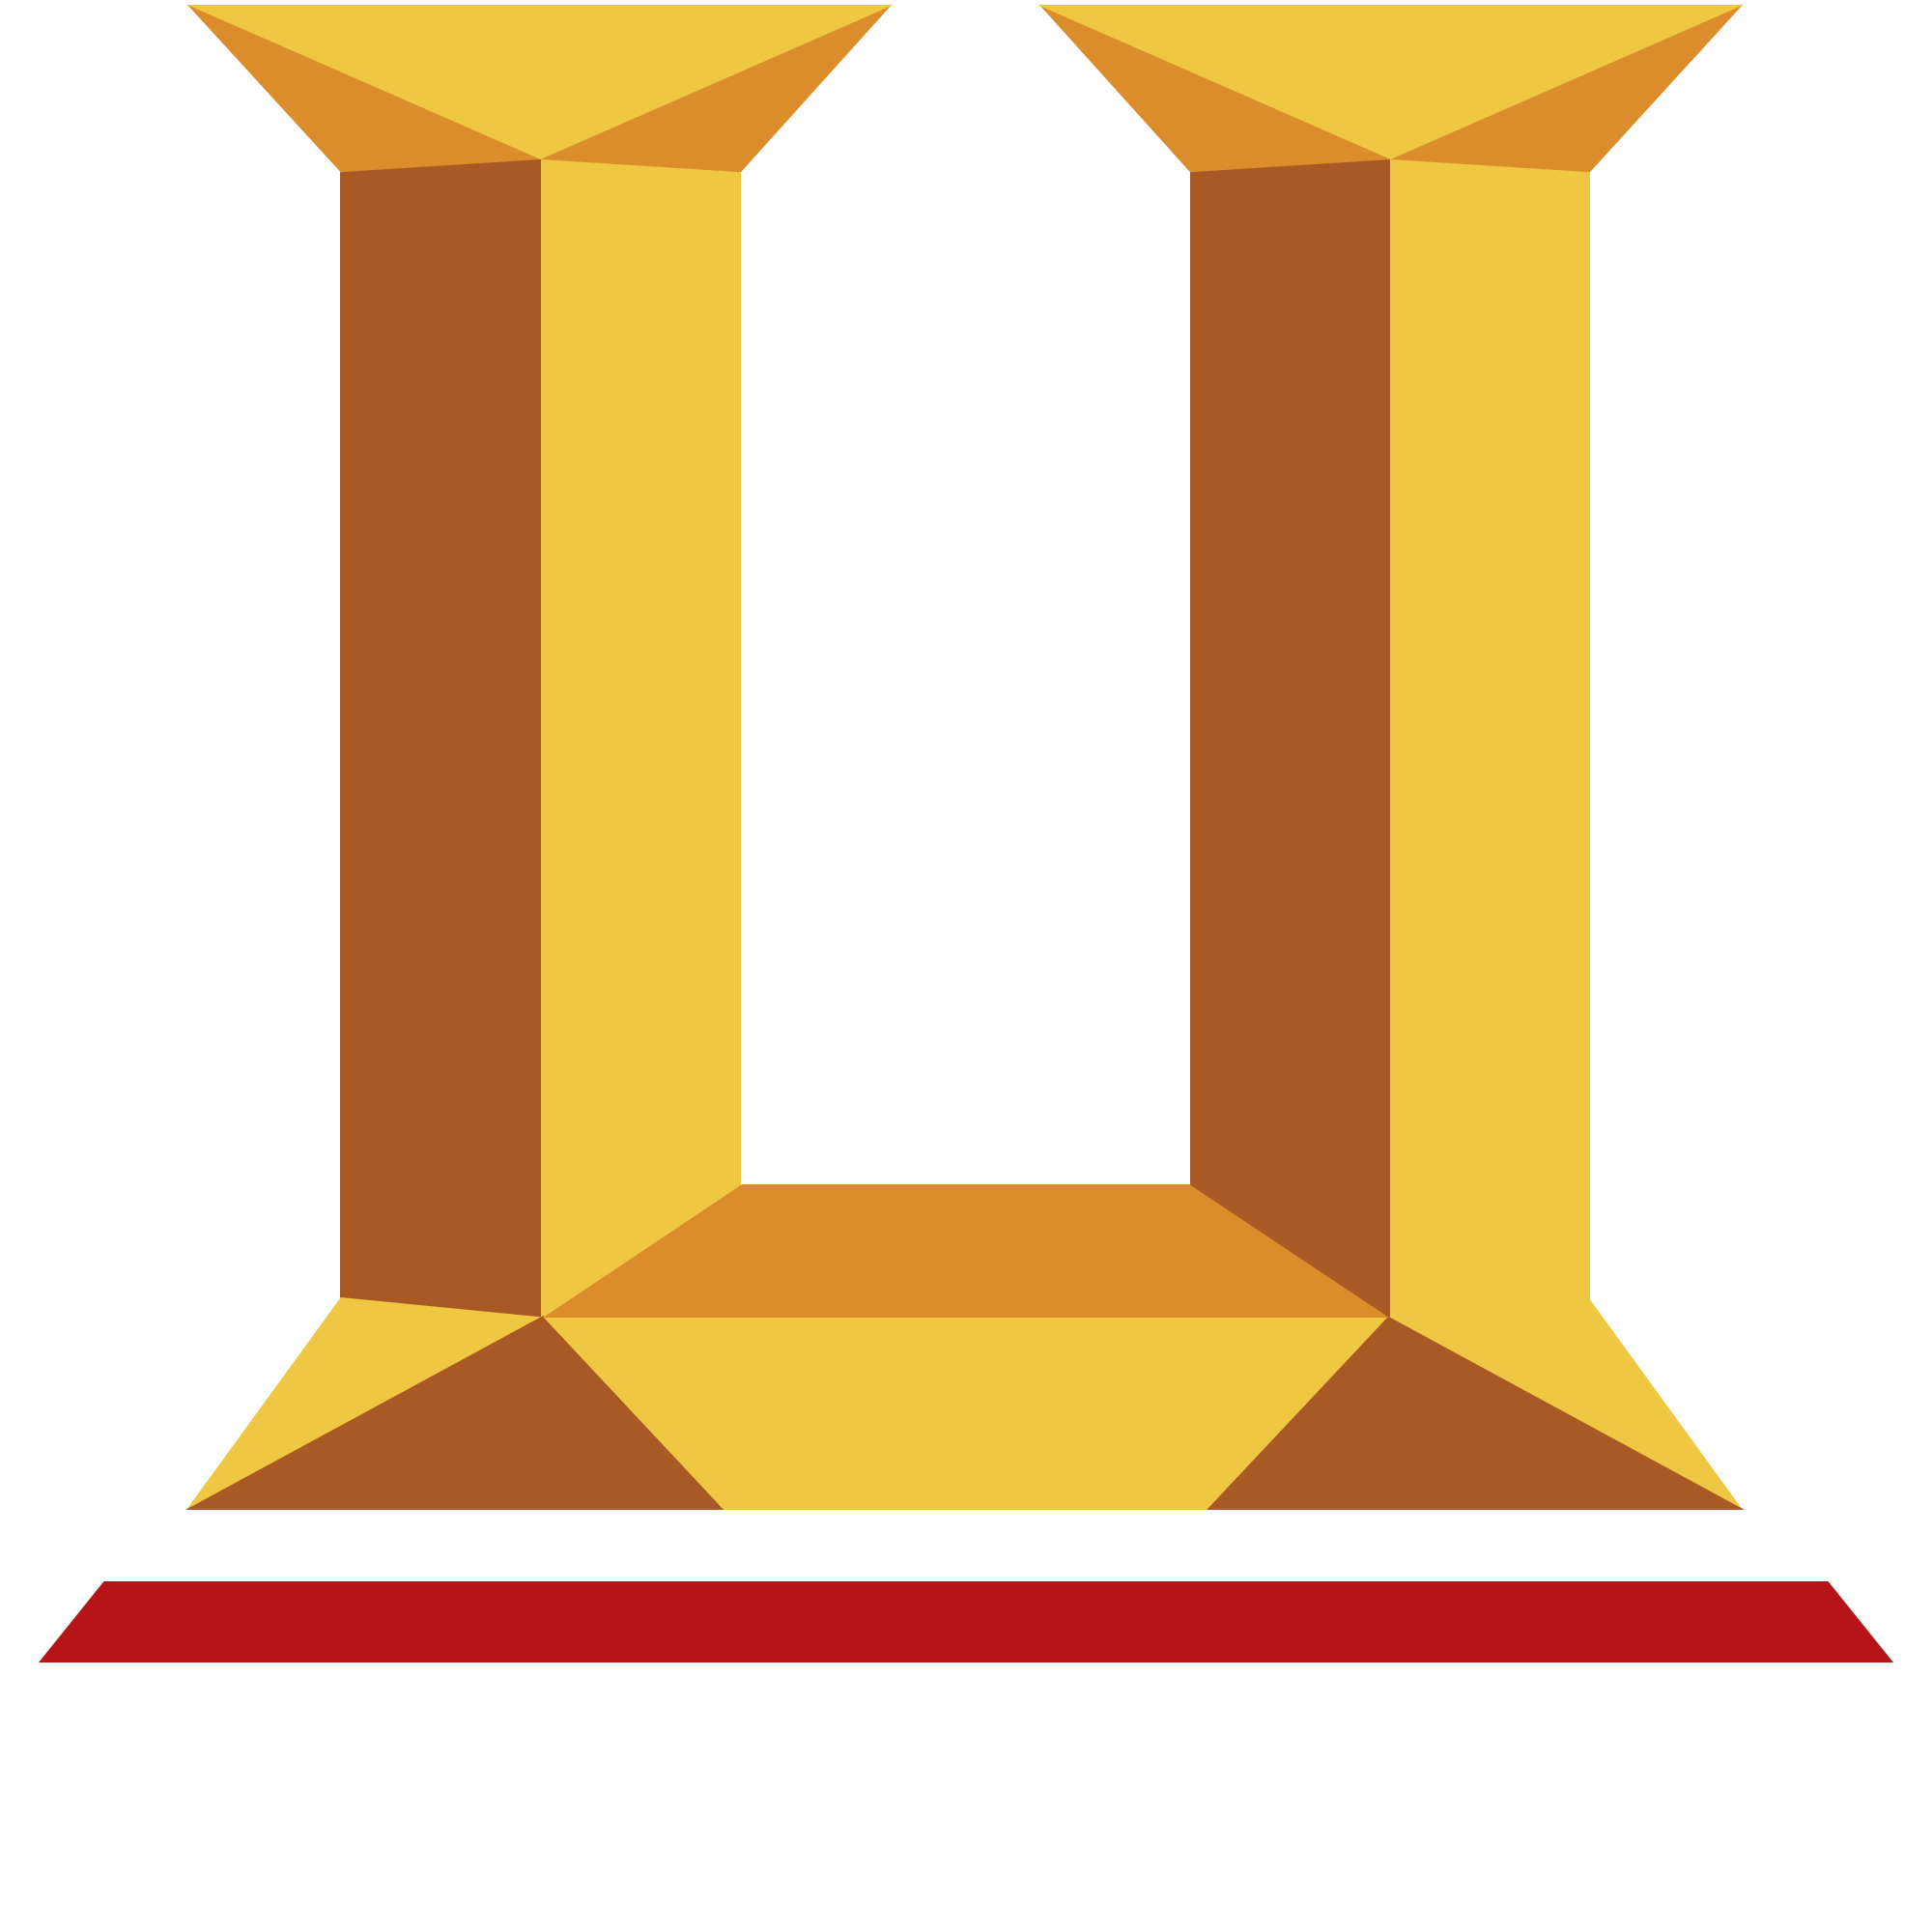 Uncolonial History